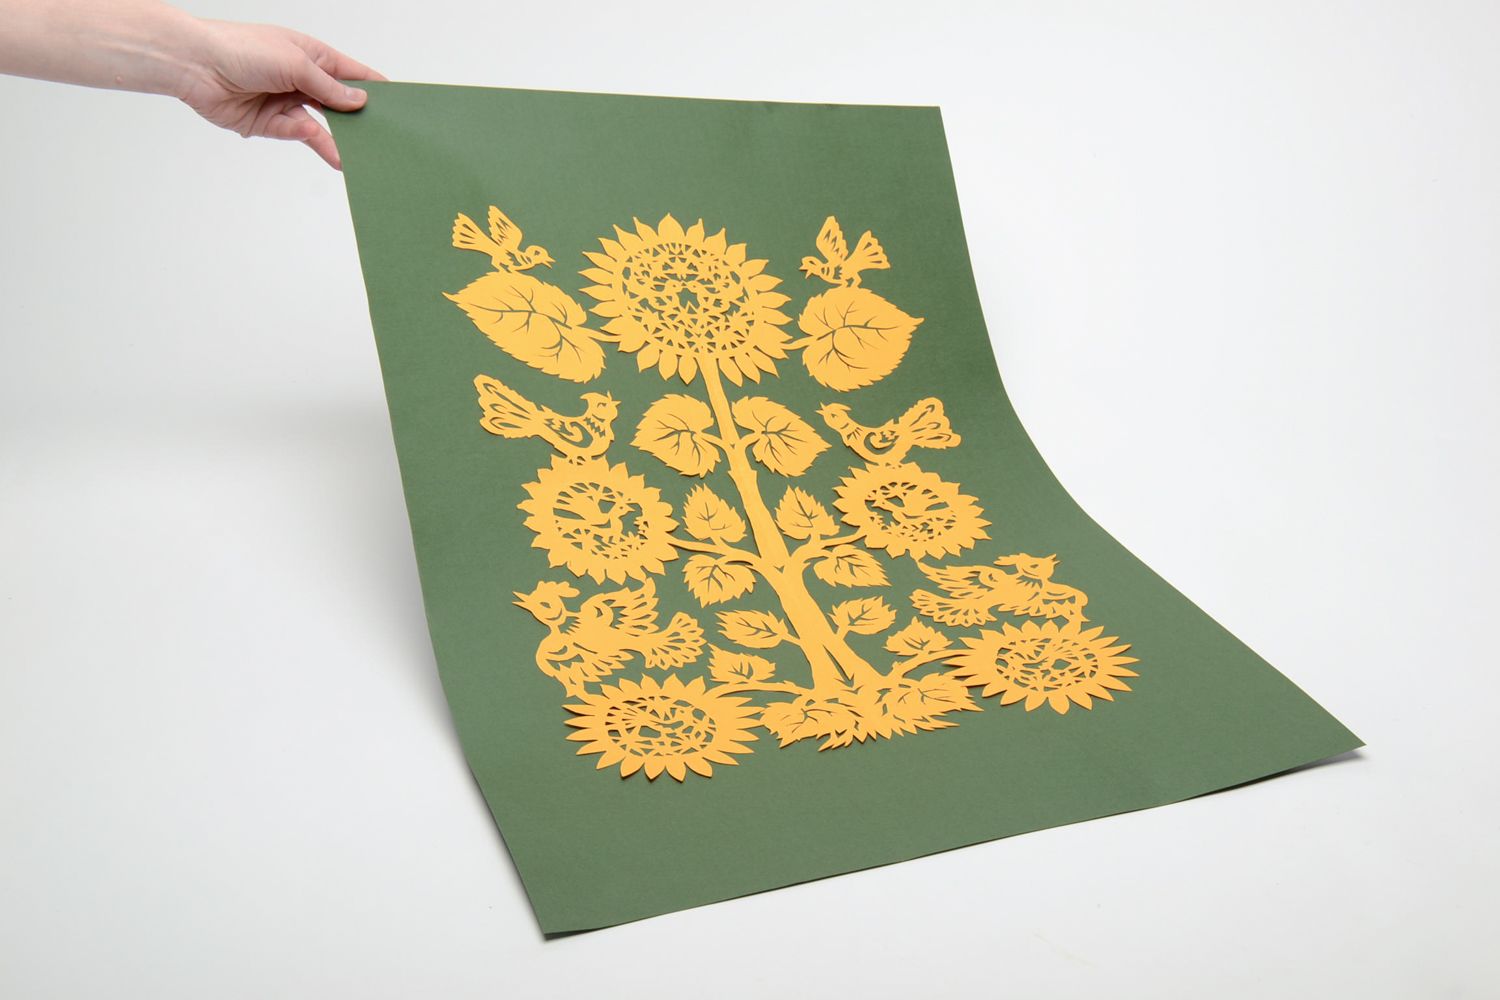 Paper cut out picture vitinanka on green background Tree of Life photo 5